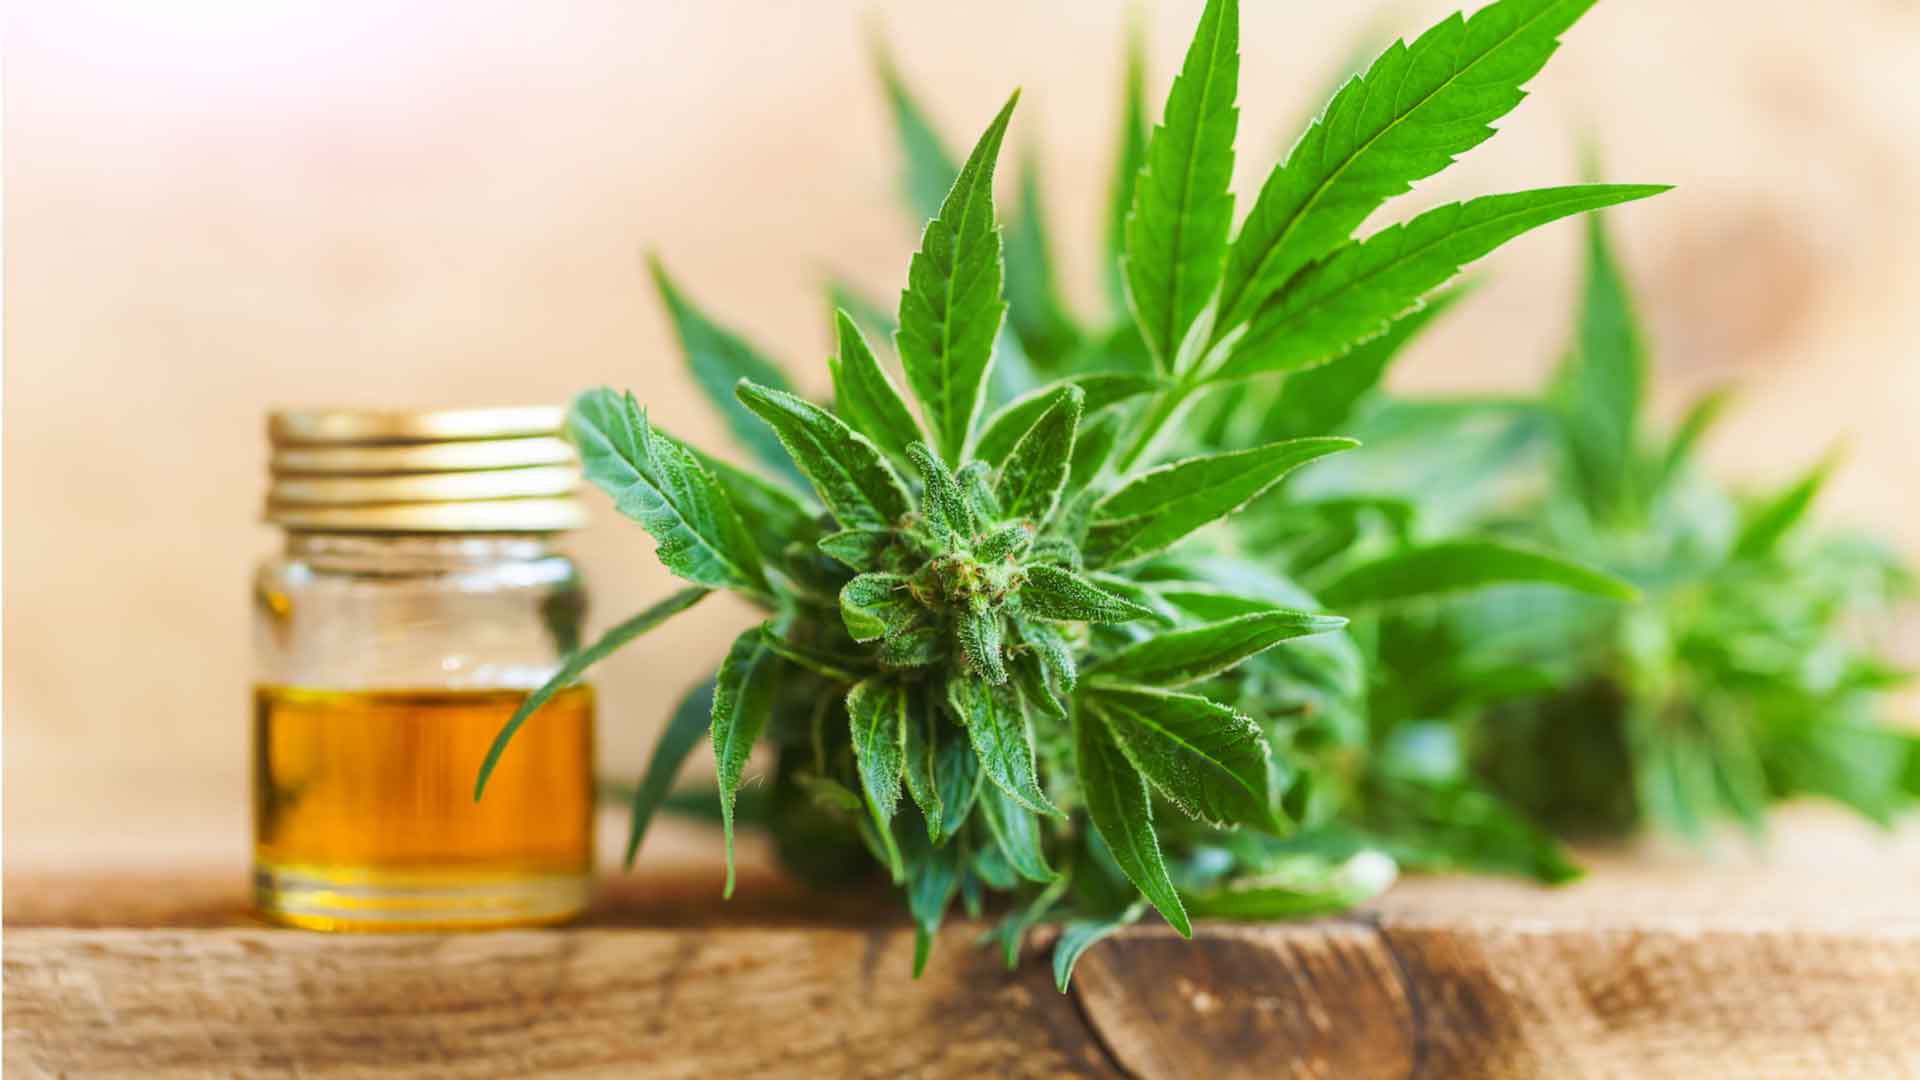 Informative guide about CBD oil in the matter of relieving pain